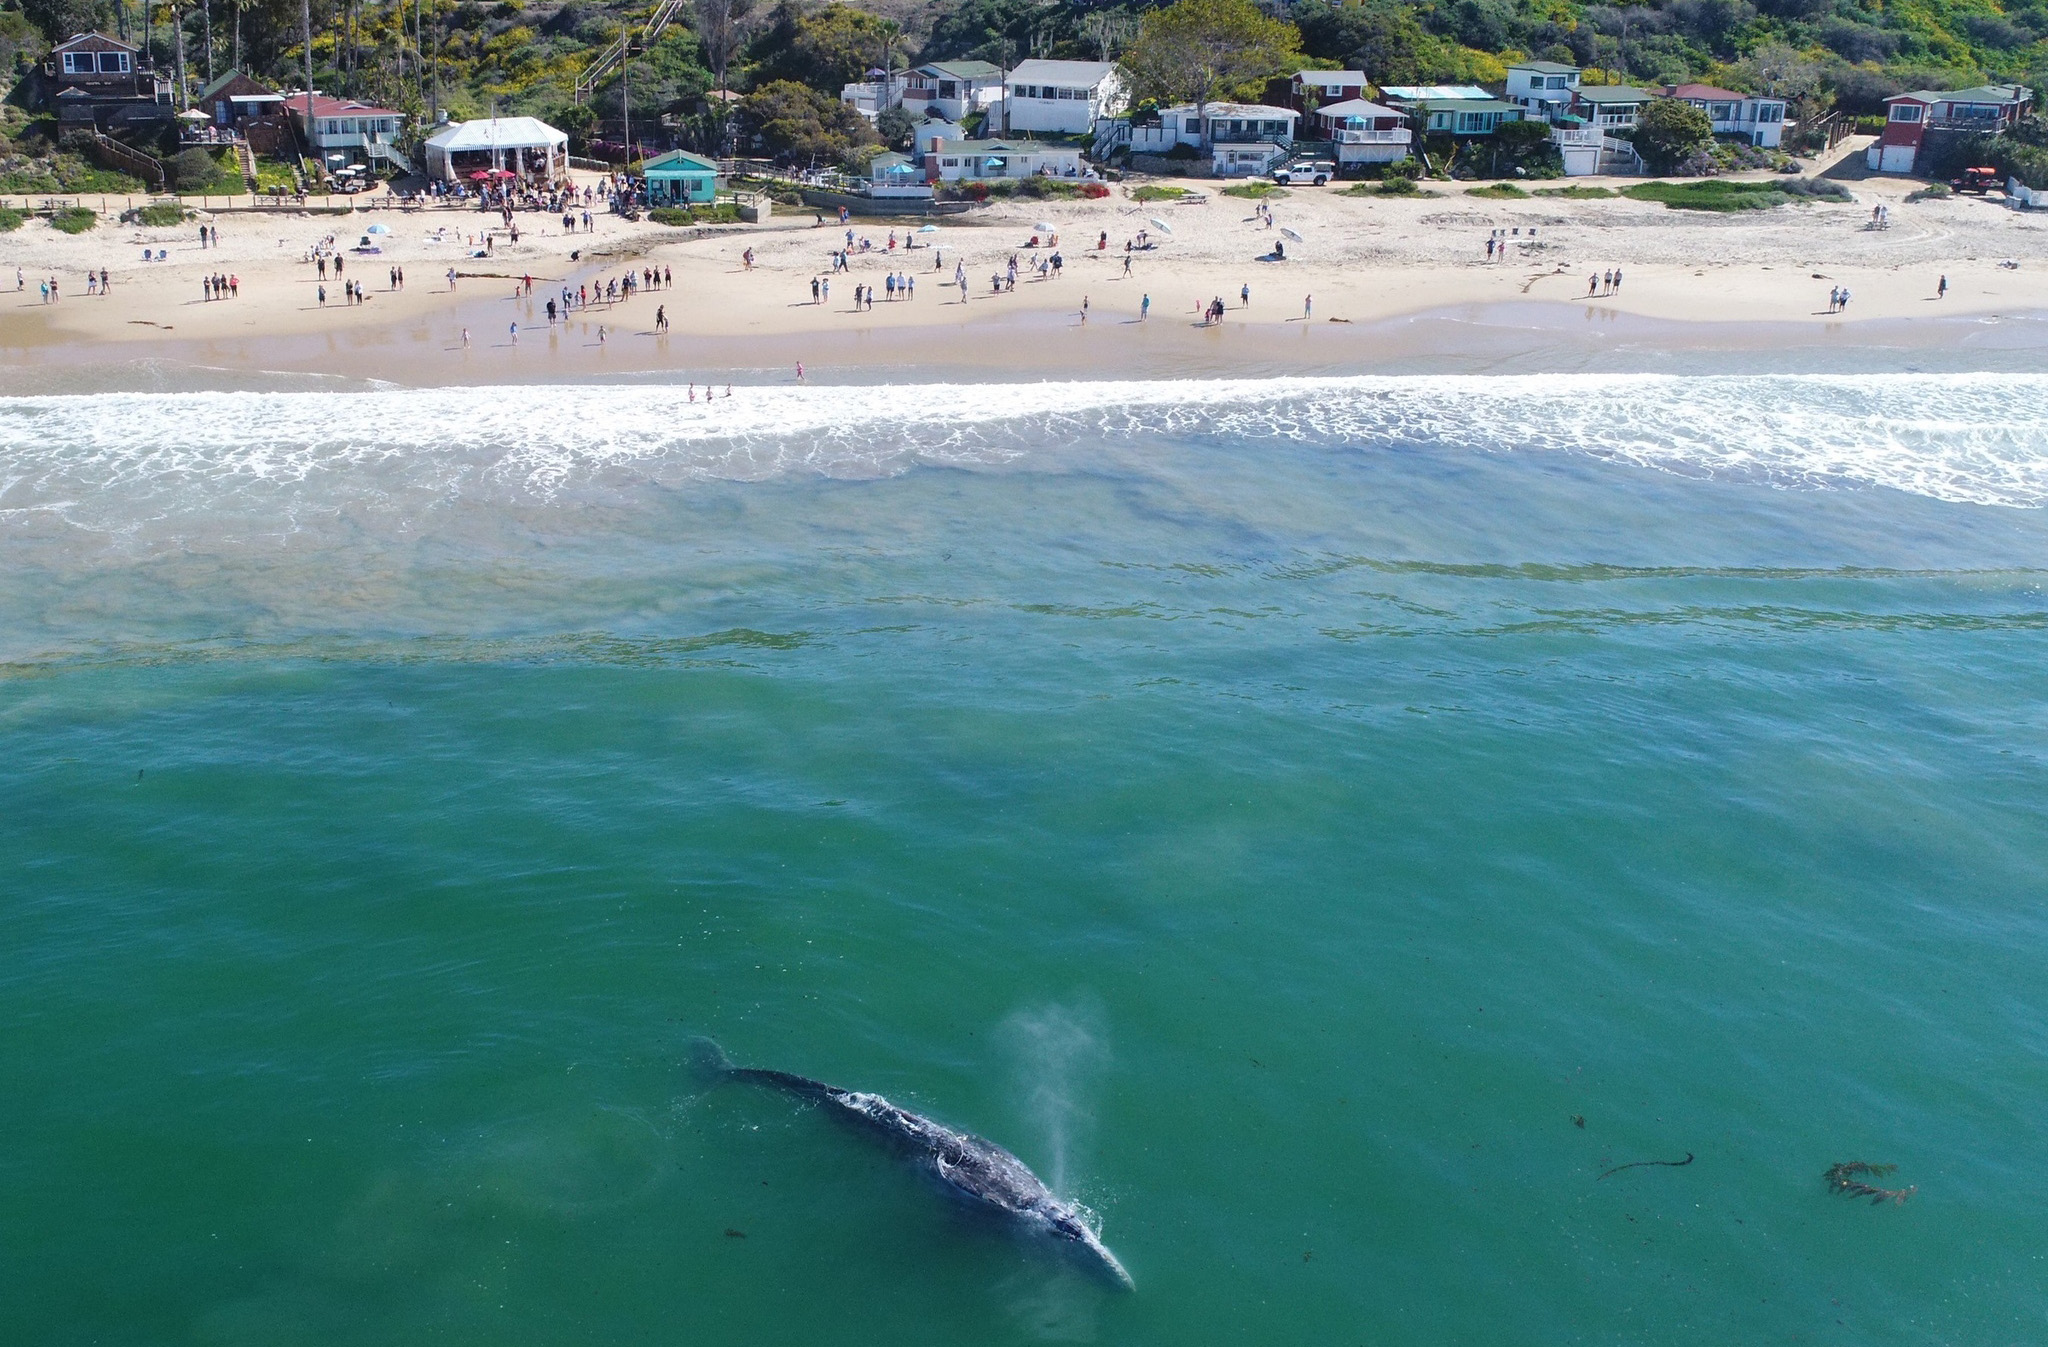 A whale is spotted at Crystal Cove State Park (Photo: Crystal Cove Conservancy)